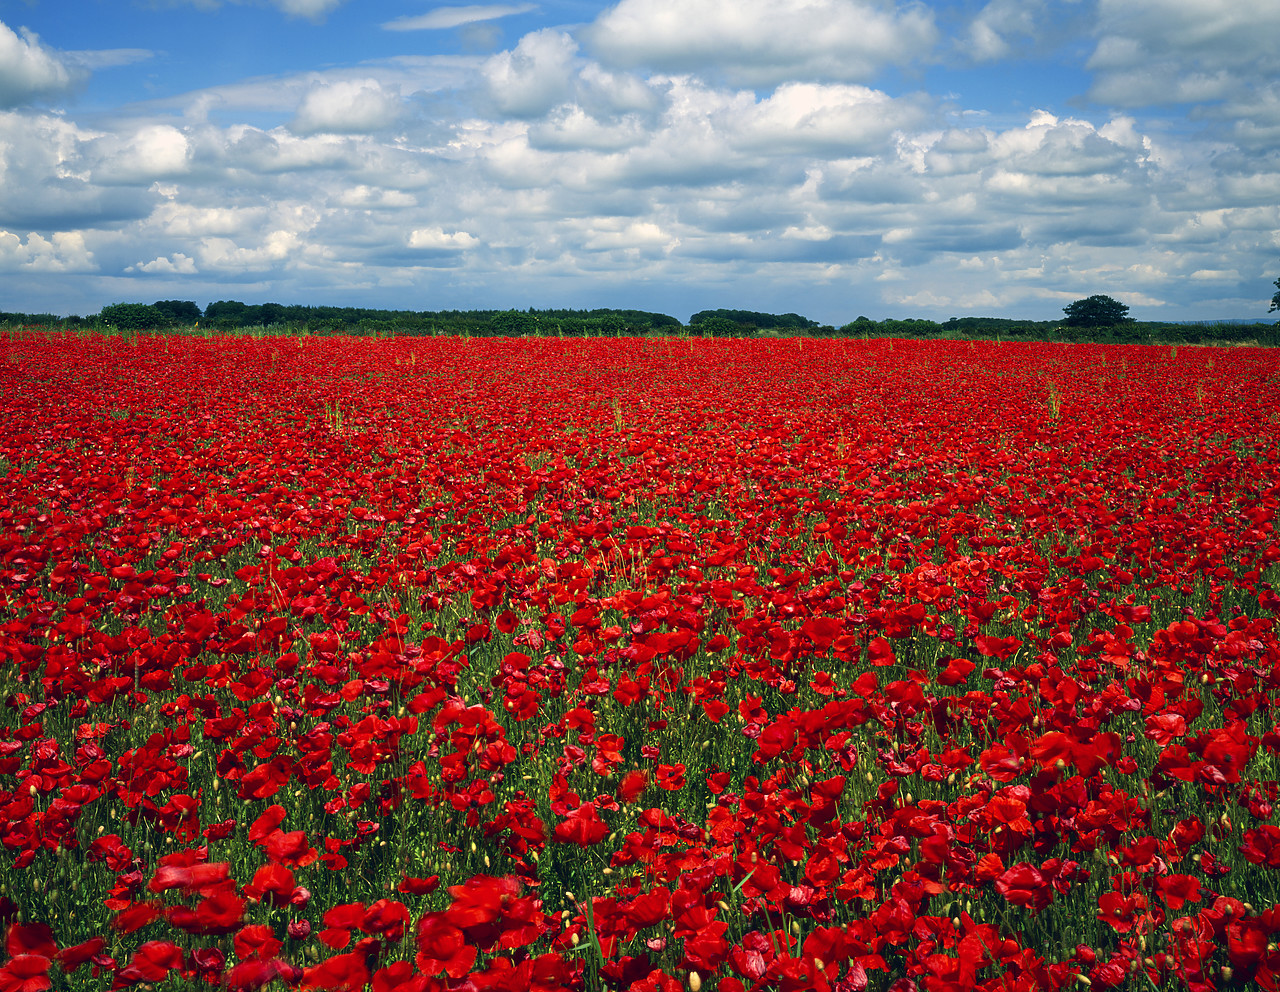 #966116-3 - Field of Poppies, North Yorkshire, England